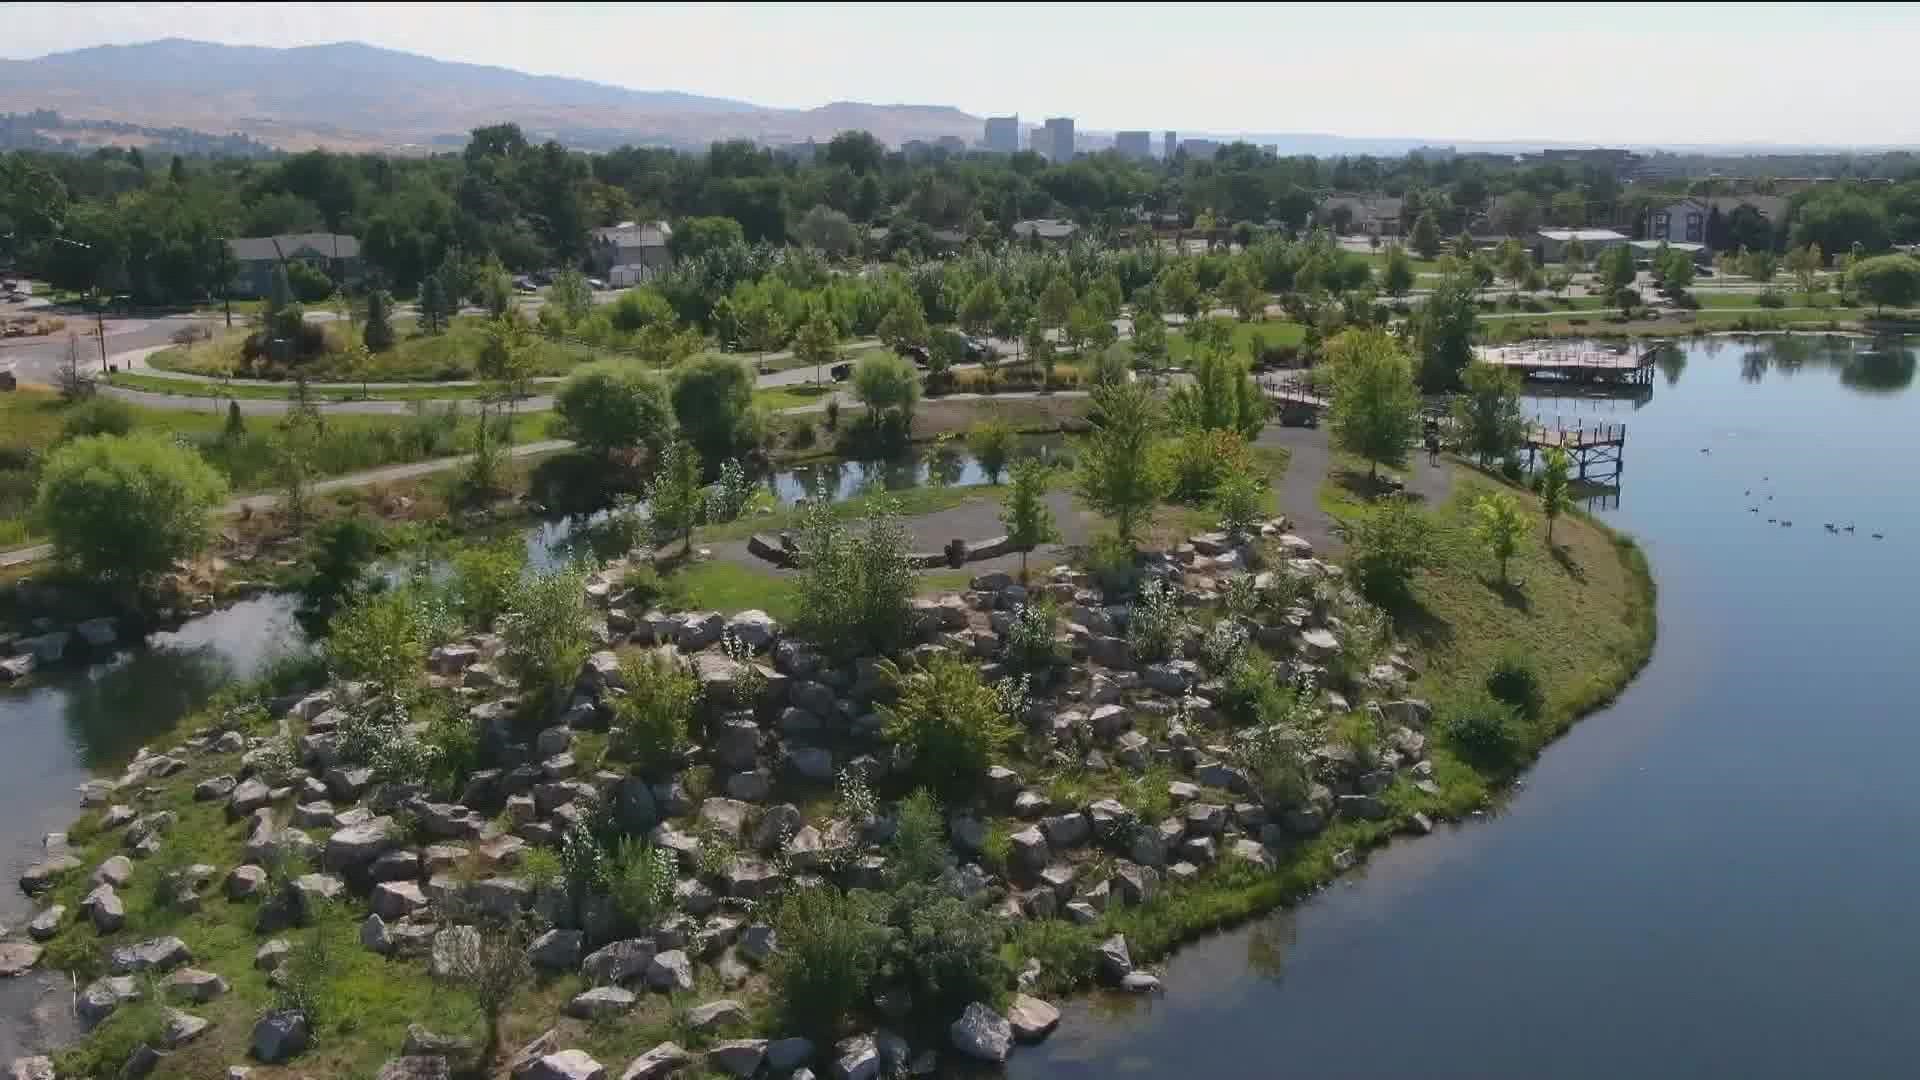 The 55-acre park, completed in 2016, is a popular spot in Boise during the summer months, due to the fact that 22 acres of the space is water.